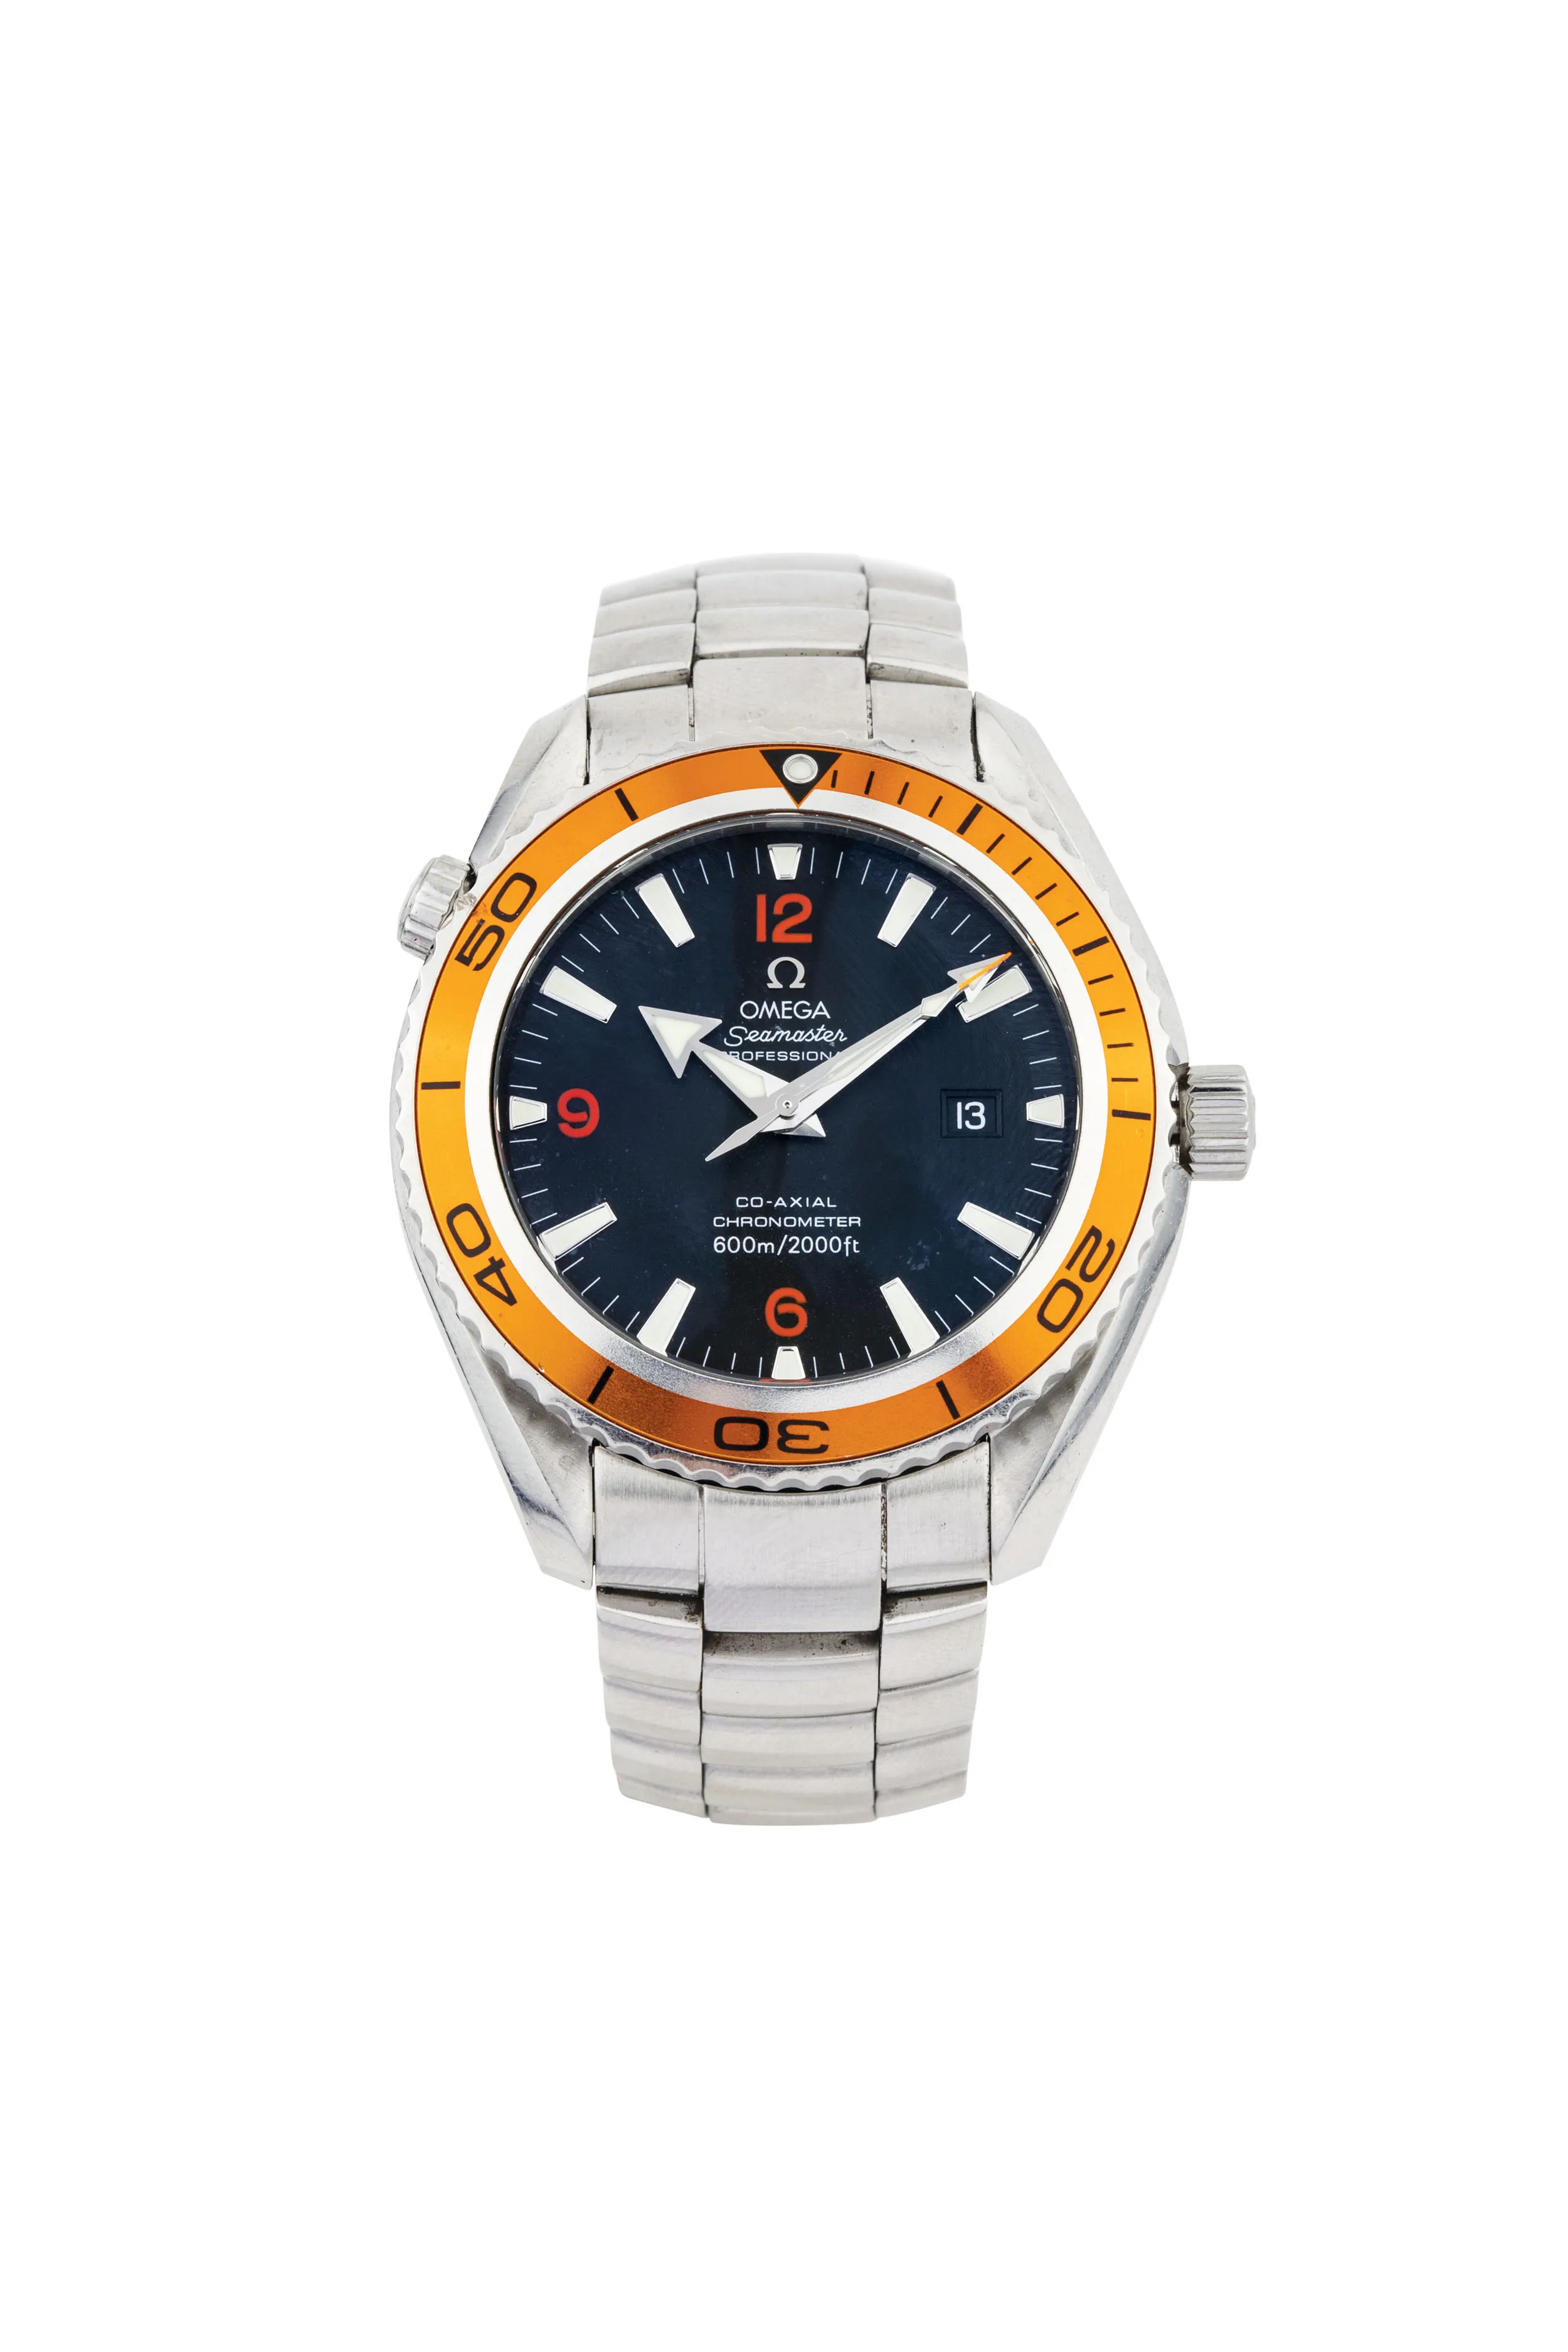 Omega Seamaster Professional 2209 43mm Stainless steel